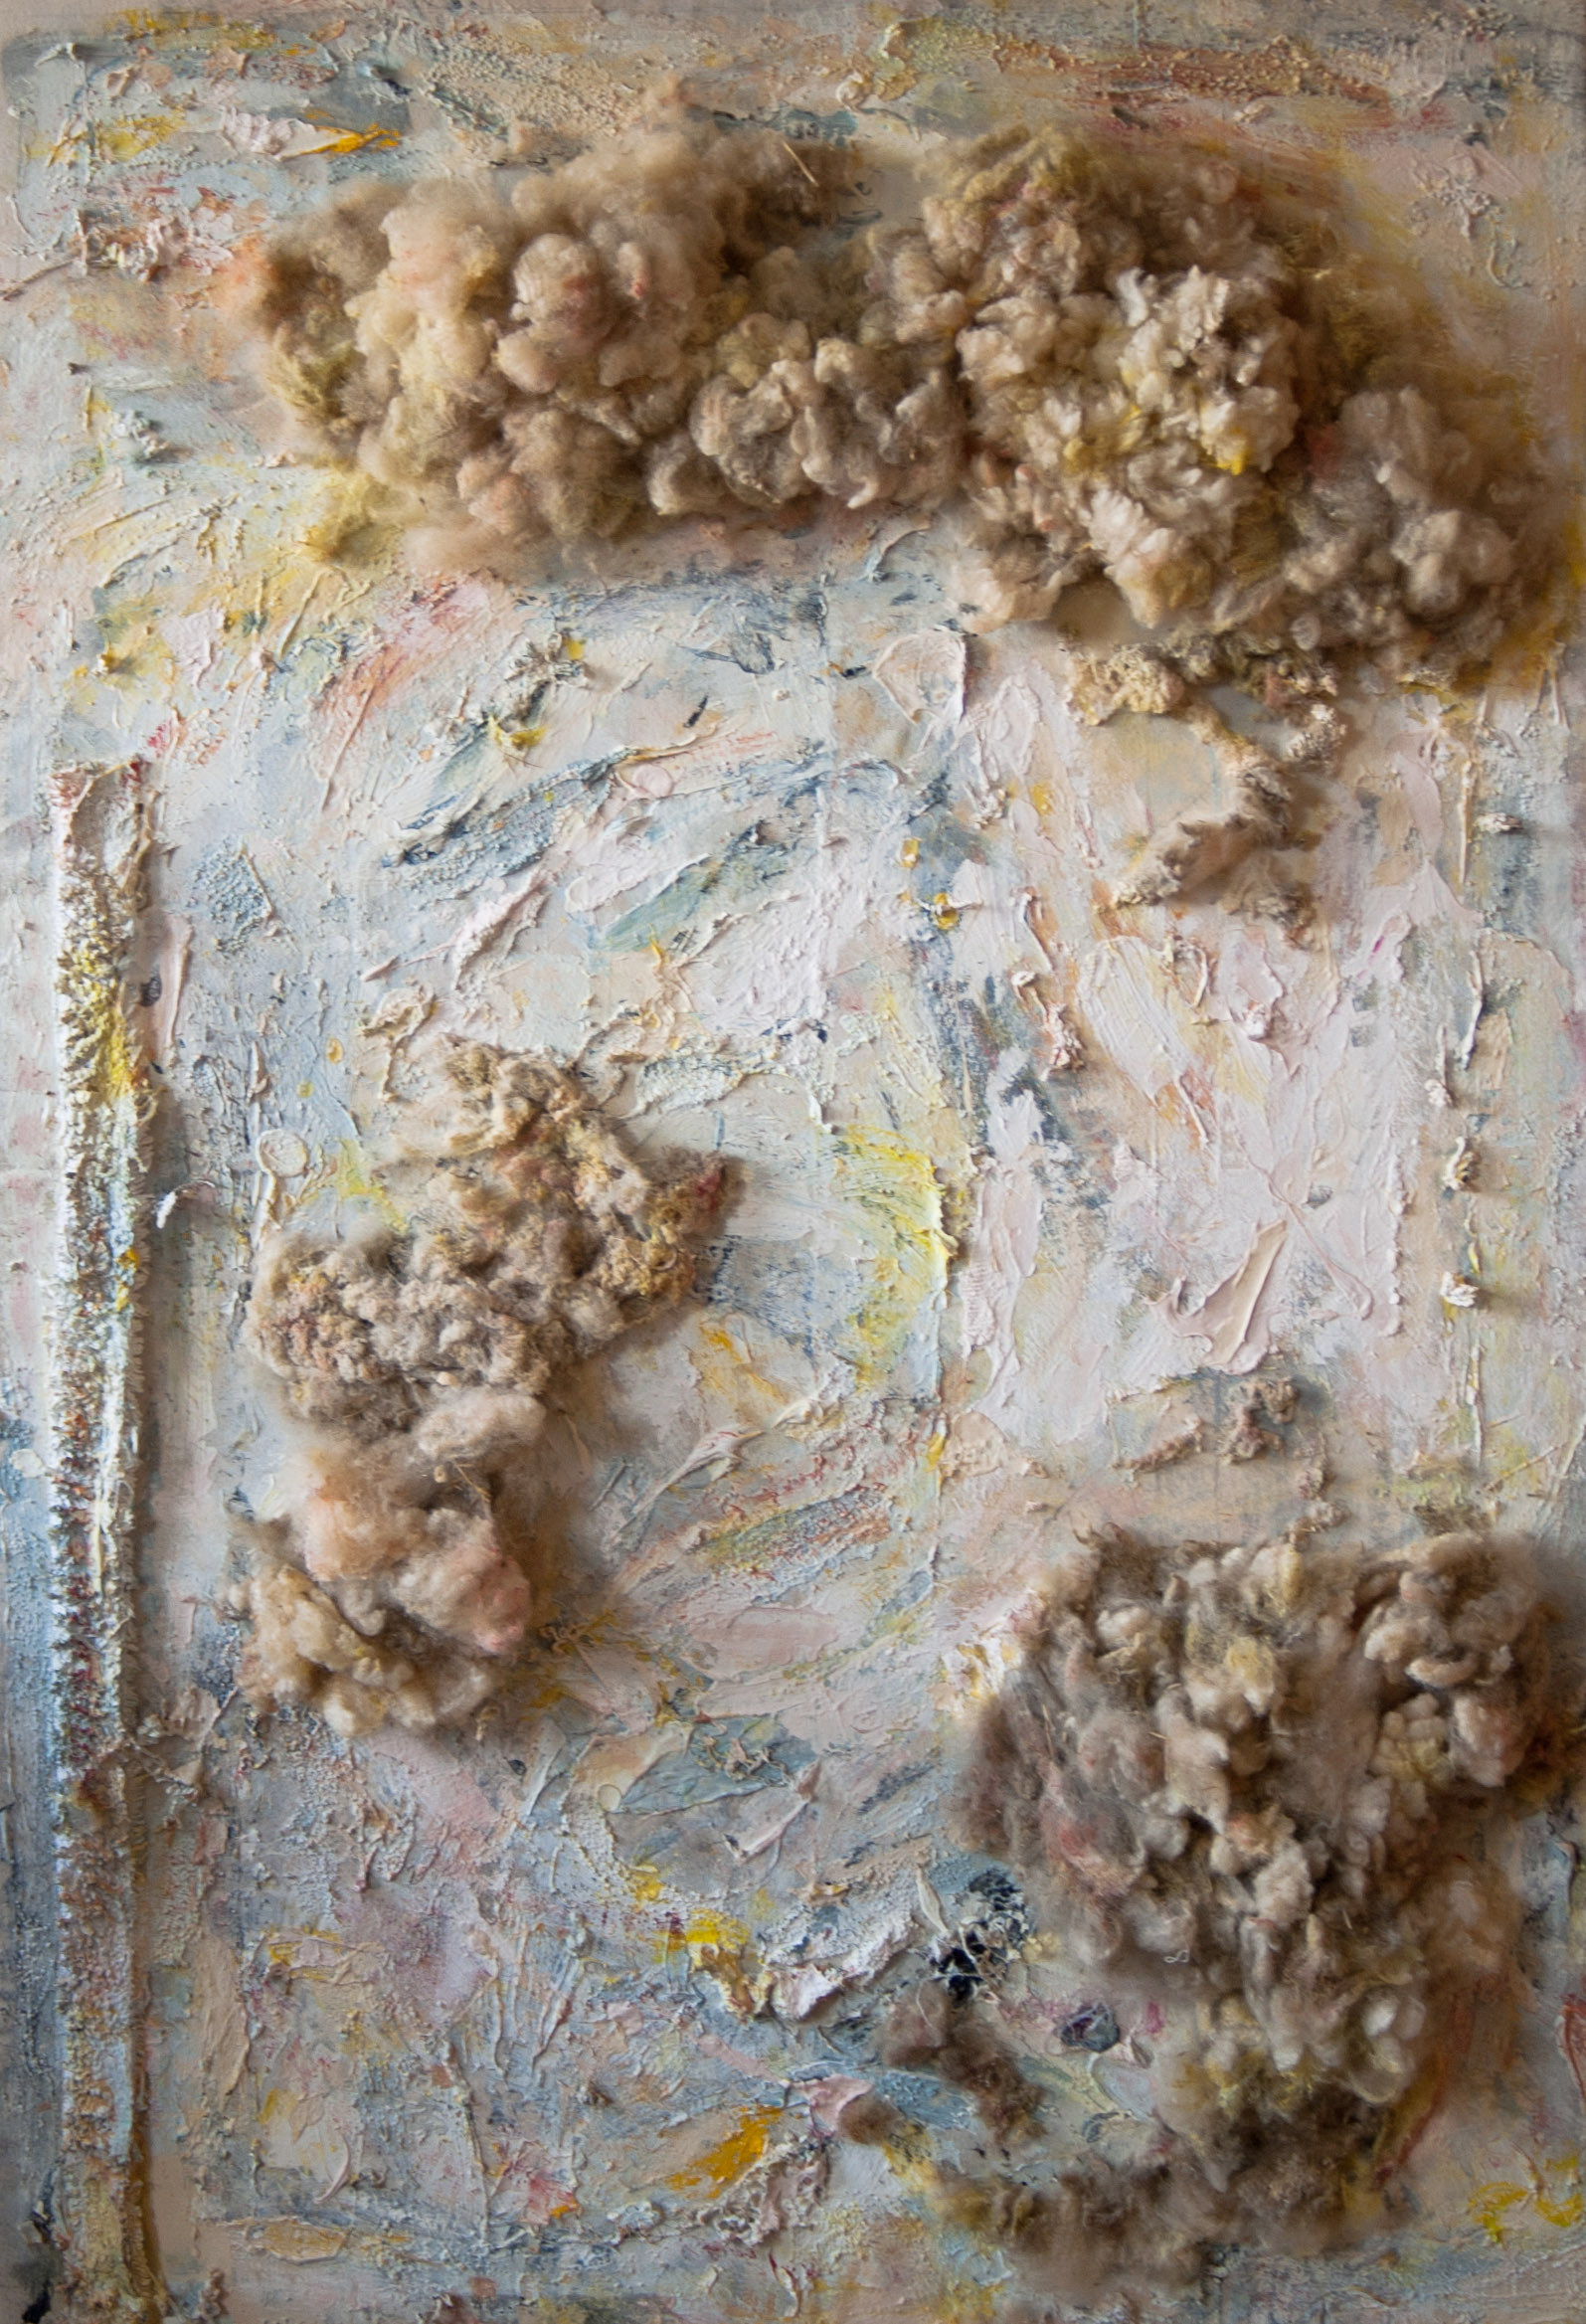  untitled I (2), new york city, 2015    oil, acrylic, sheeps wool, and carpet on unprimed canvas    63.5 x 43 inches 